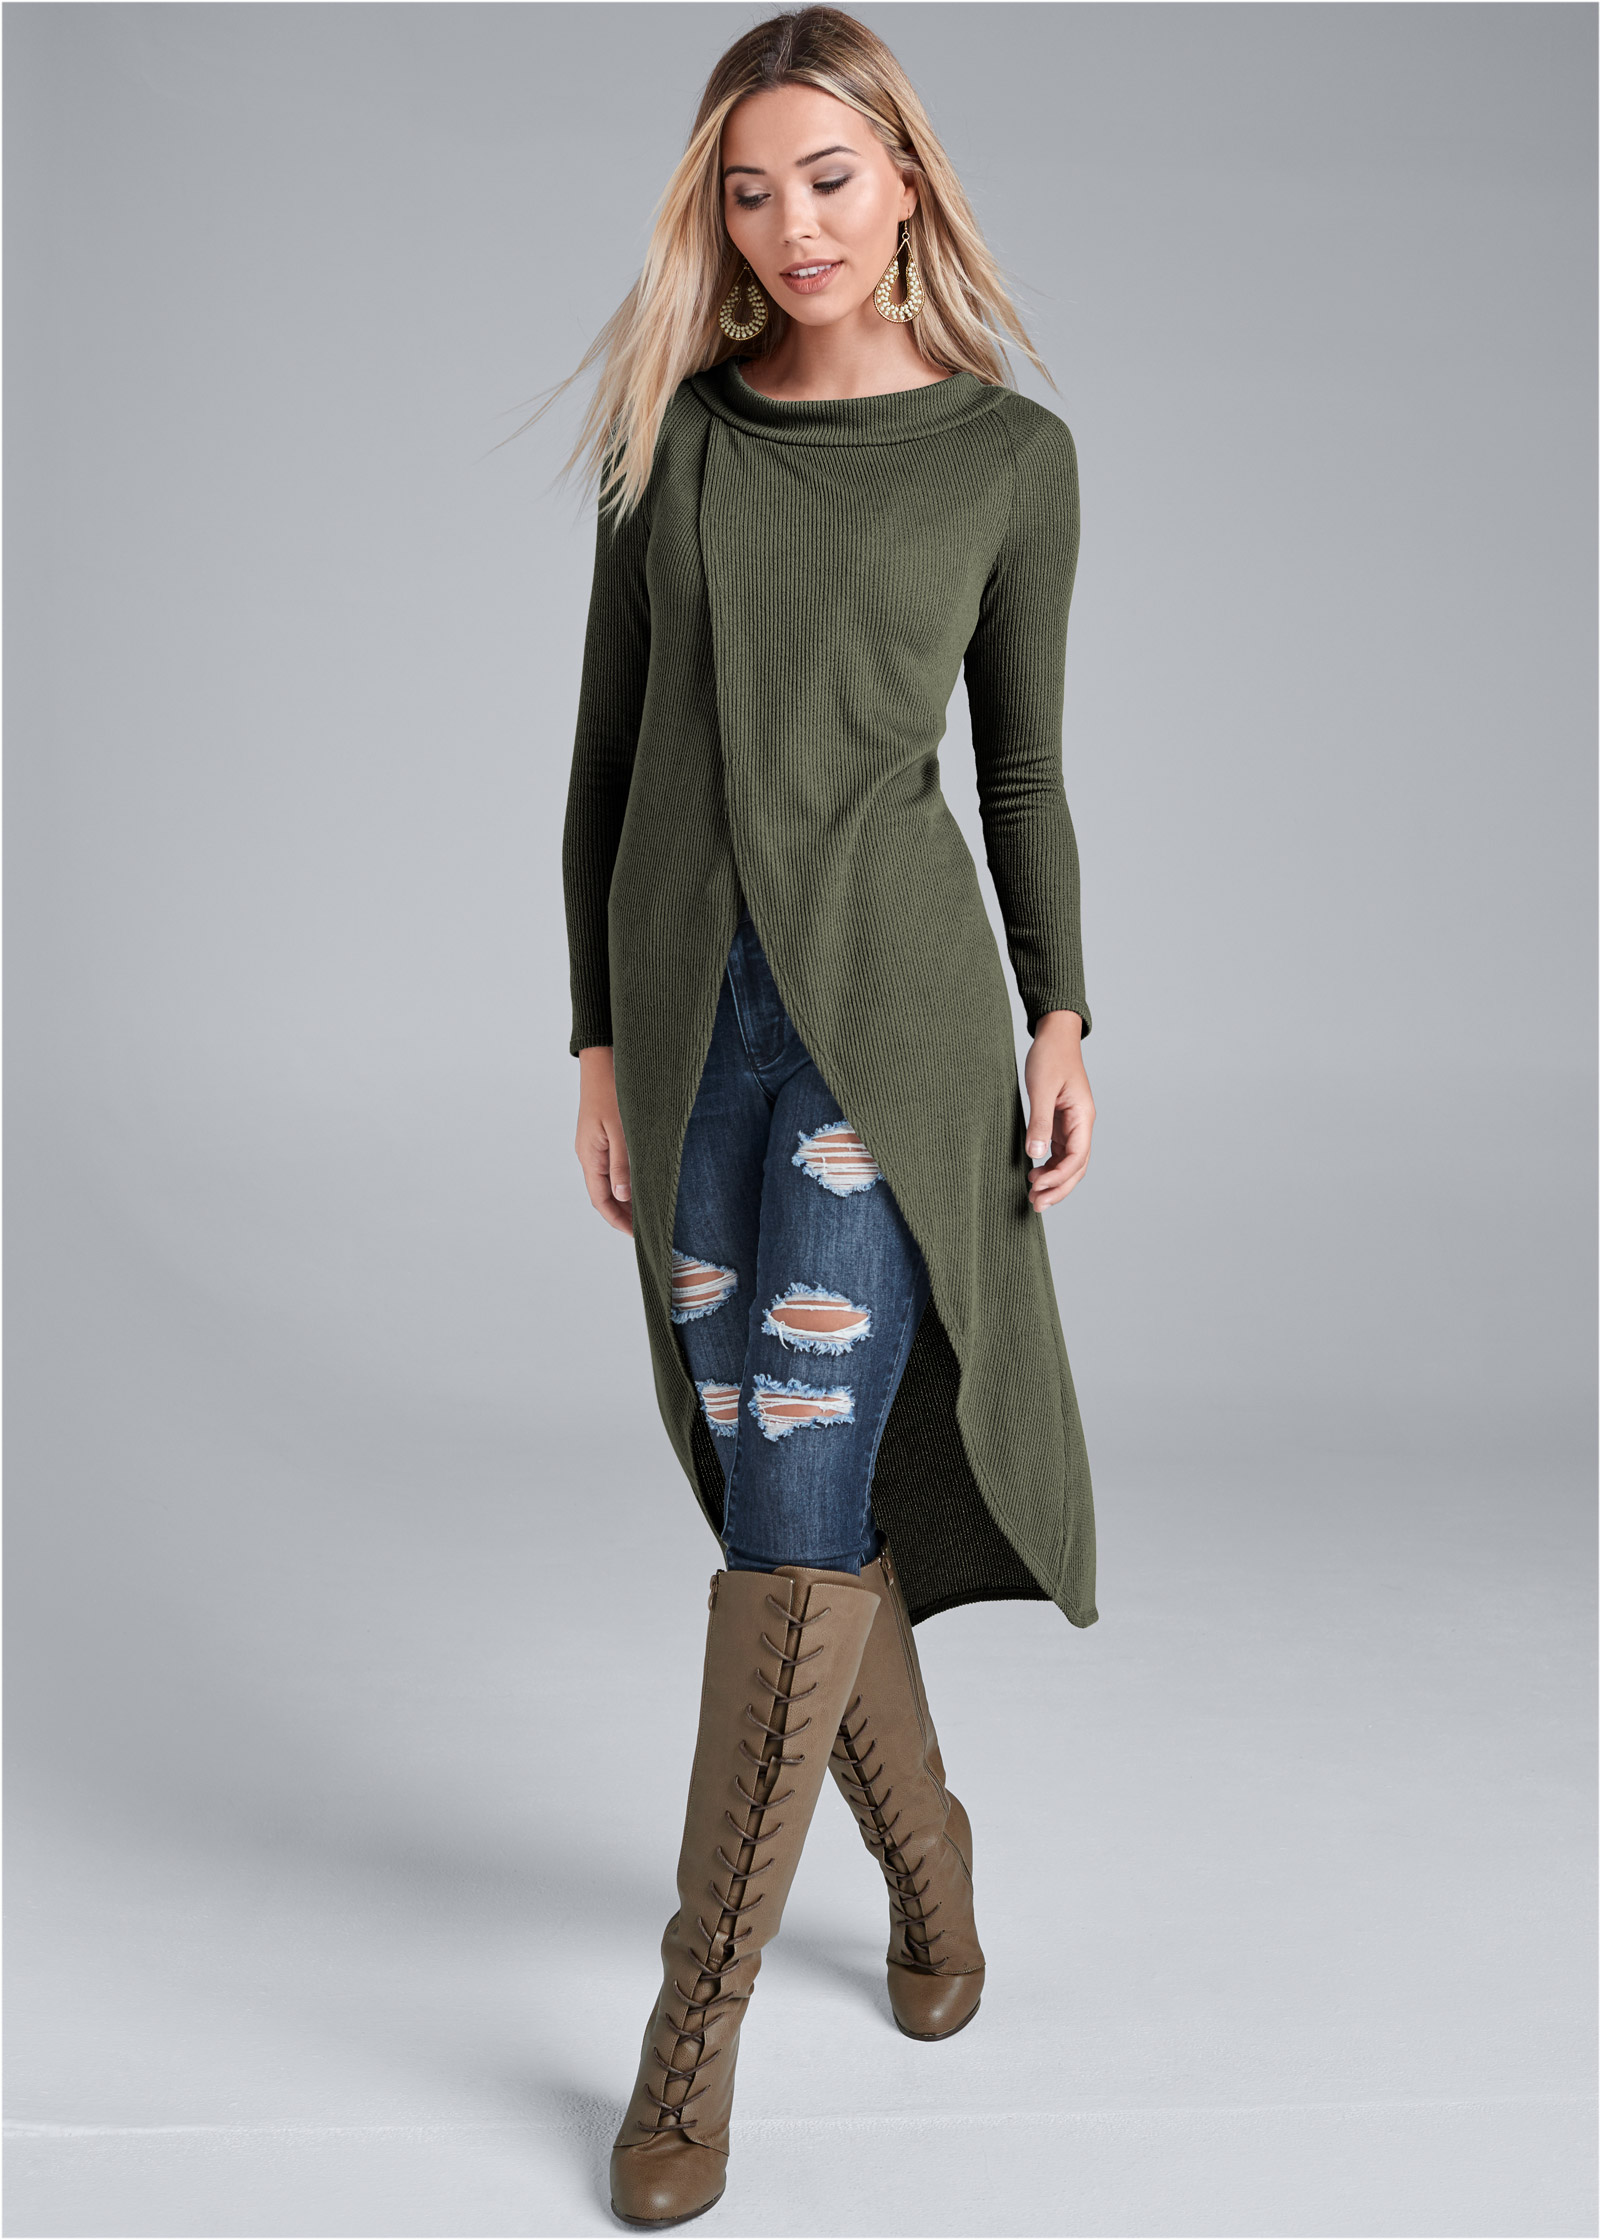 Casual High Low Top in Olive | VENUS